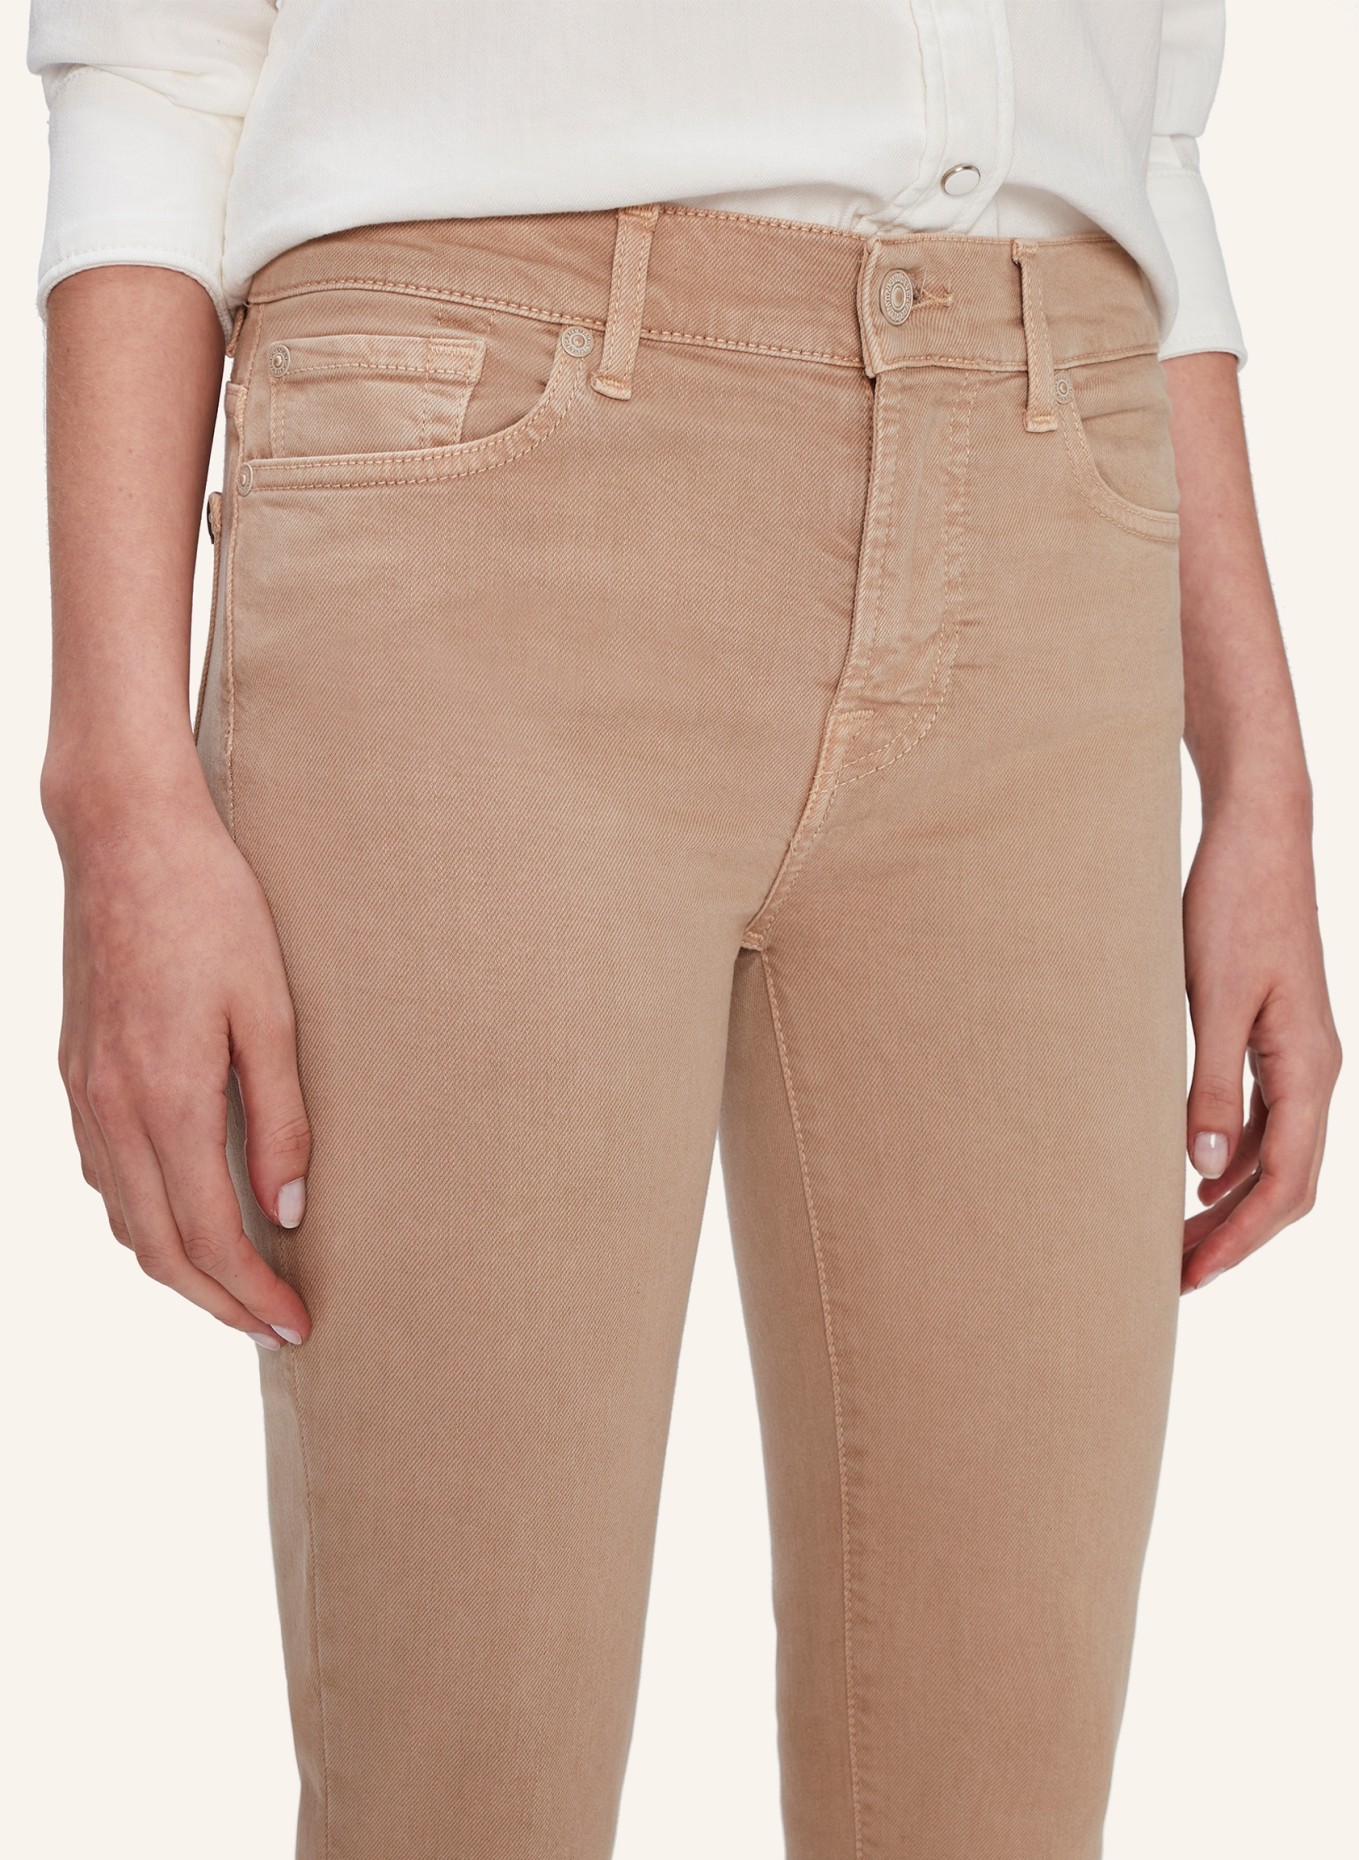 7 for all mankind Pants  ROXANNE ANKLE Slim Fit, Farbe: BEIGE (Bild 3)